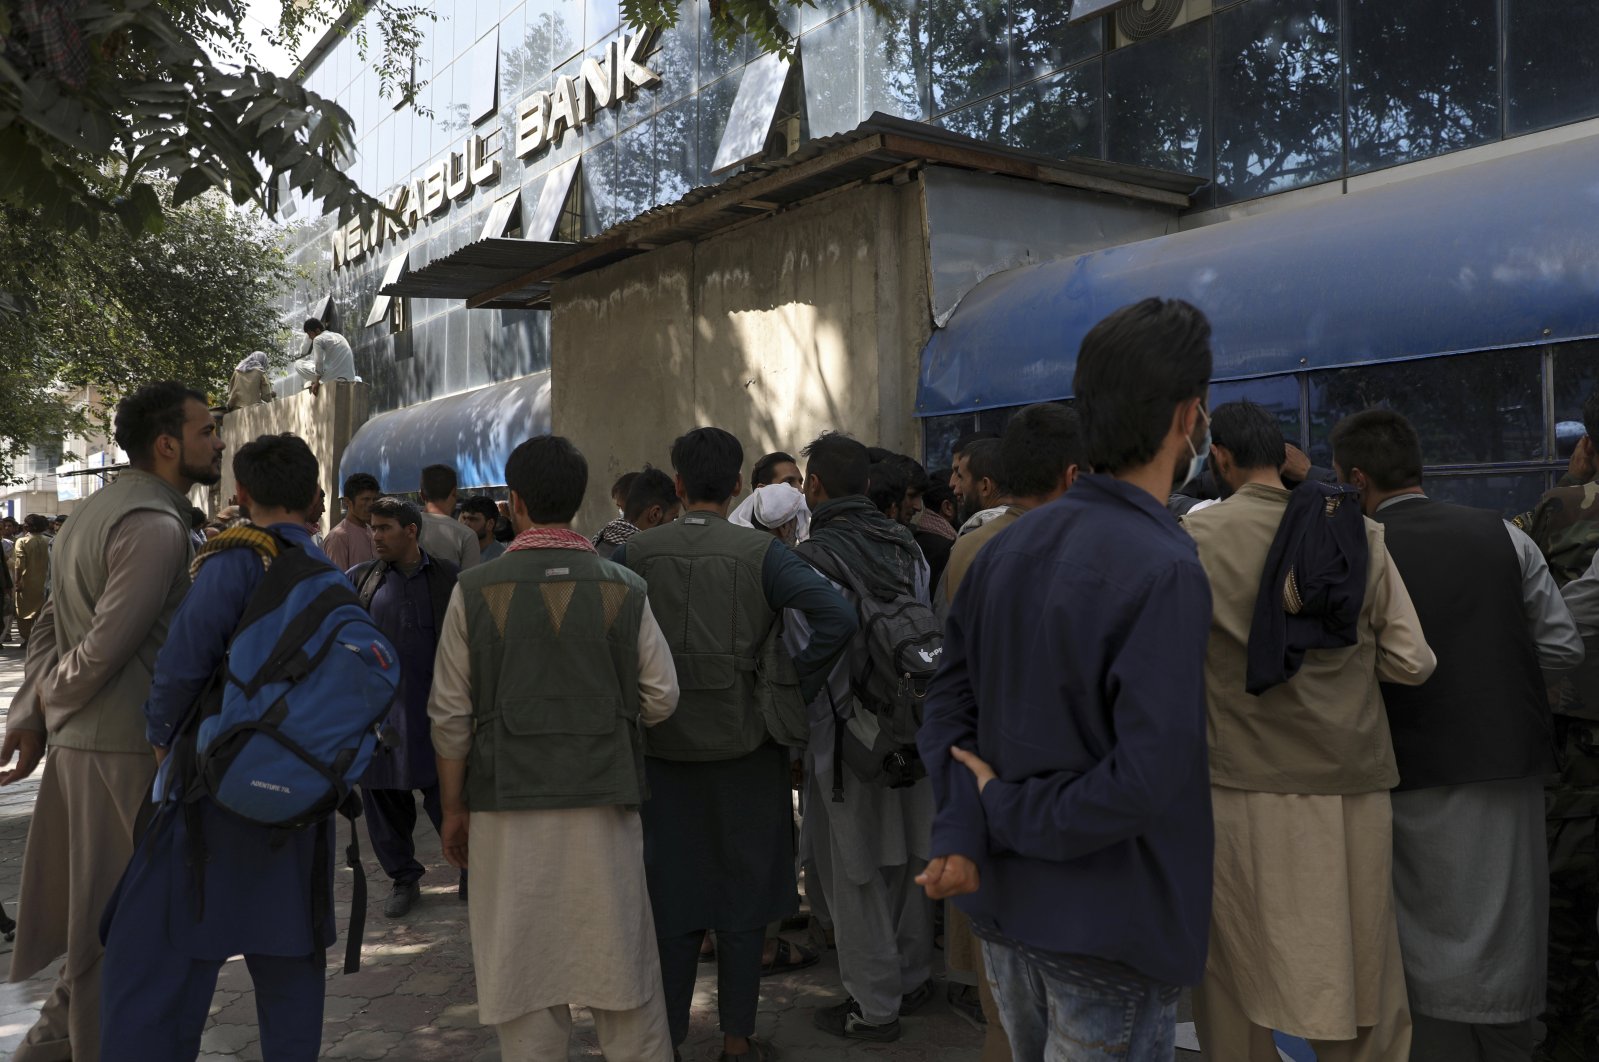 Afghans wait in long lines for hours to try to withdraw money, in front of Kabul Bank, in Kabul, Afghanistan, Aug. 15, 2021. (AP Photo)